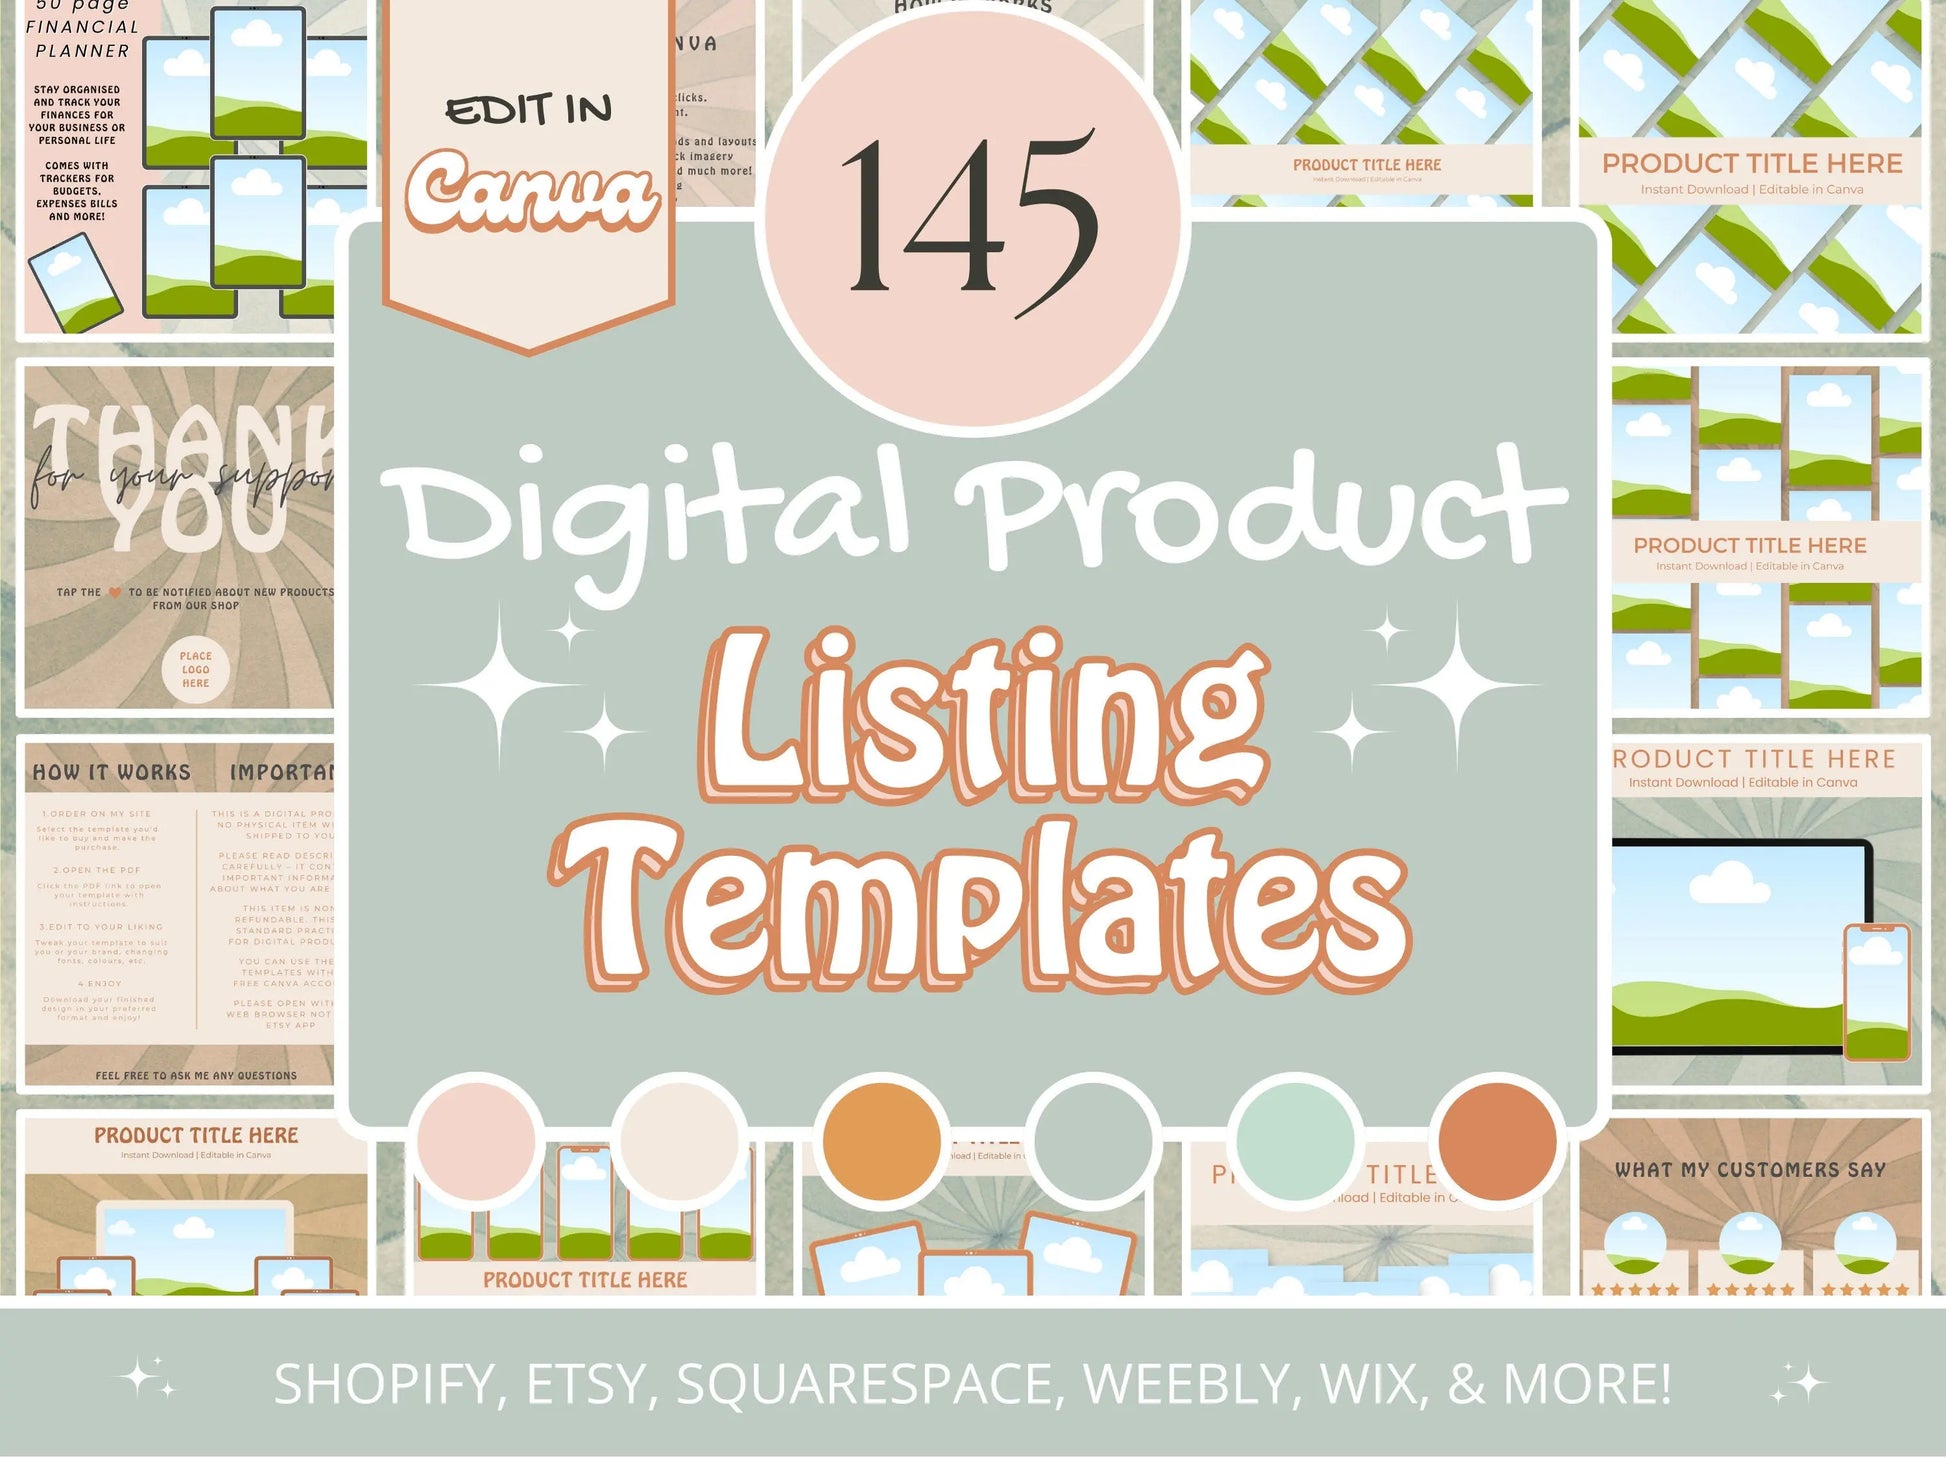 Digital Product Listing Templates Etsy Listing Designs Aesthetic Digital Online Store Marketing Ecommerce Digital Product Templates